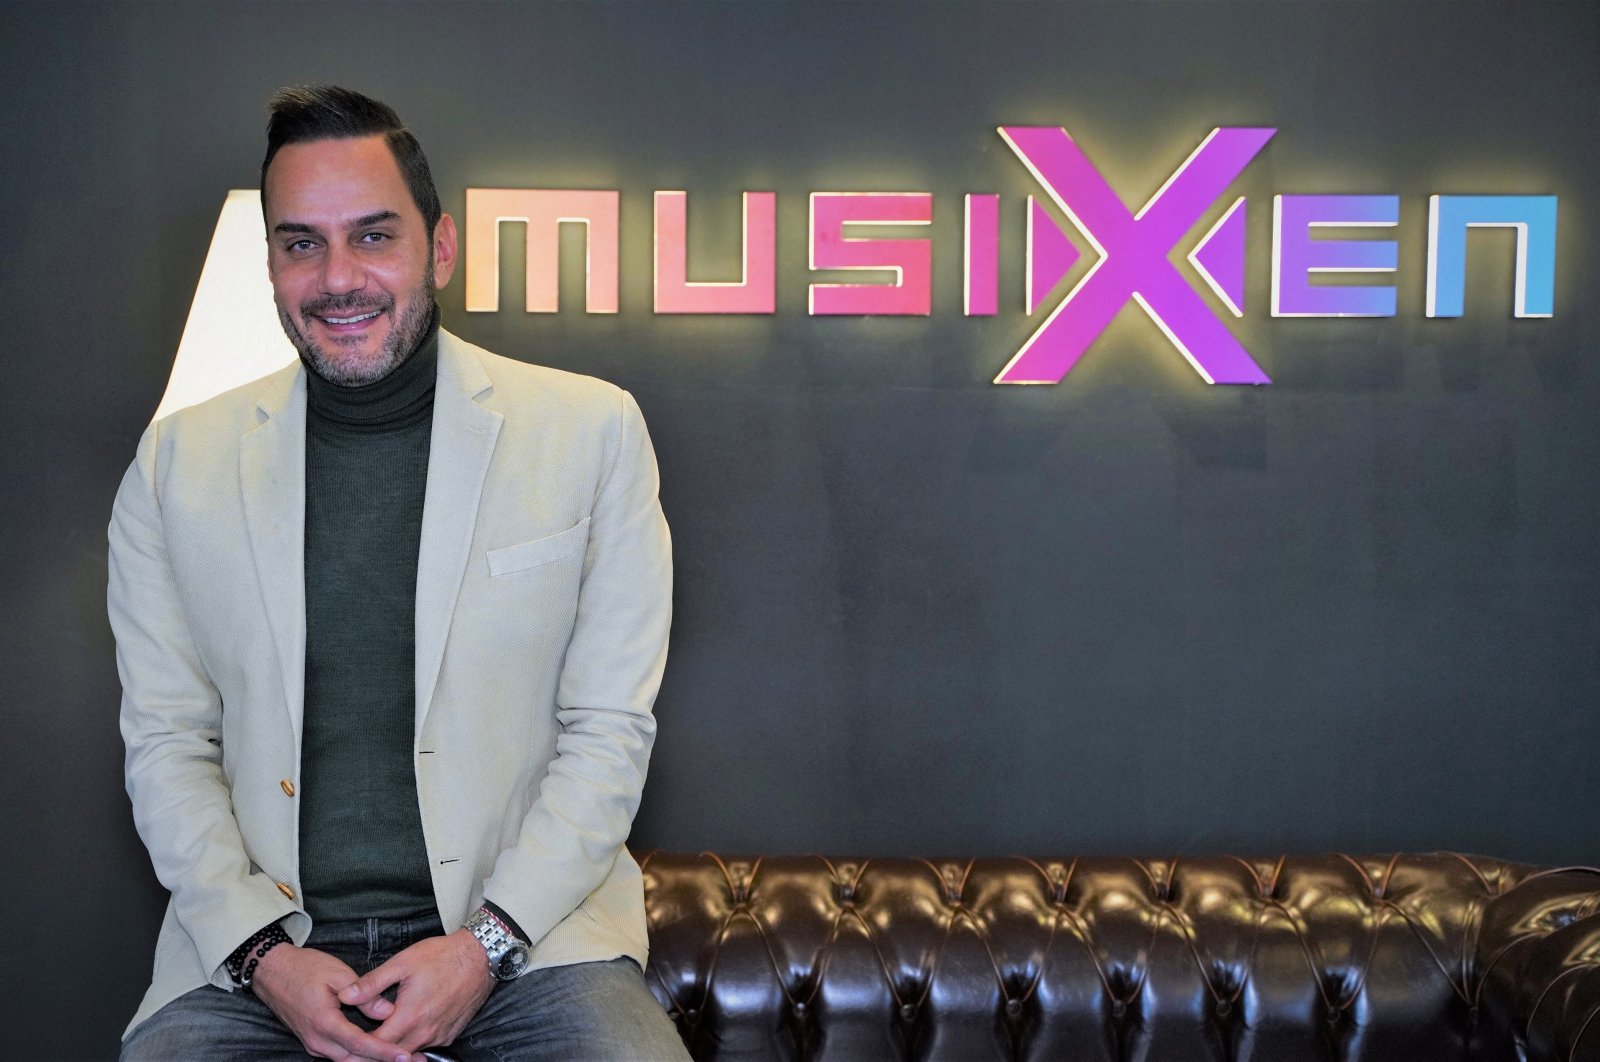 Çağrı Bozay, founder and CEO of Musixen, says the music industry is changing rapidly along with technological developments. (Courtesy of Musixen)